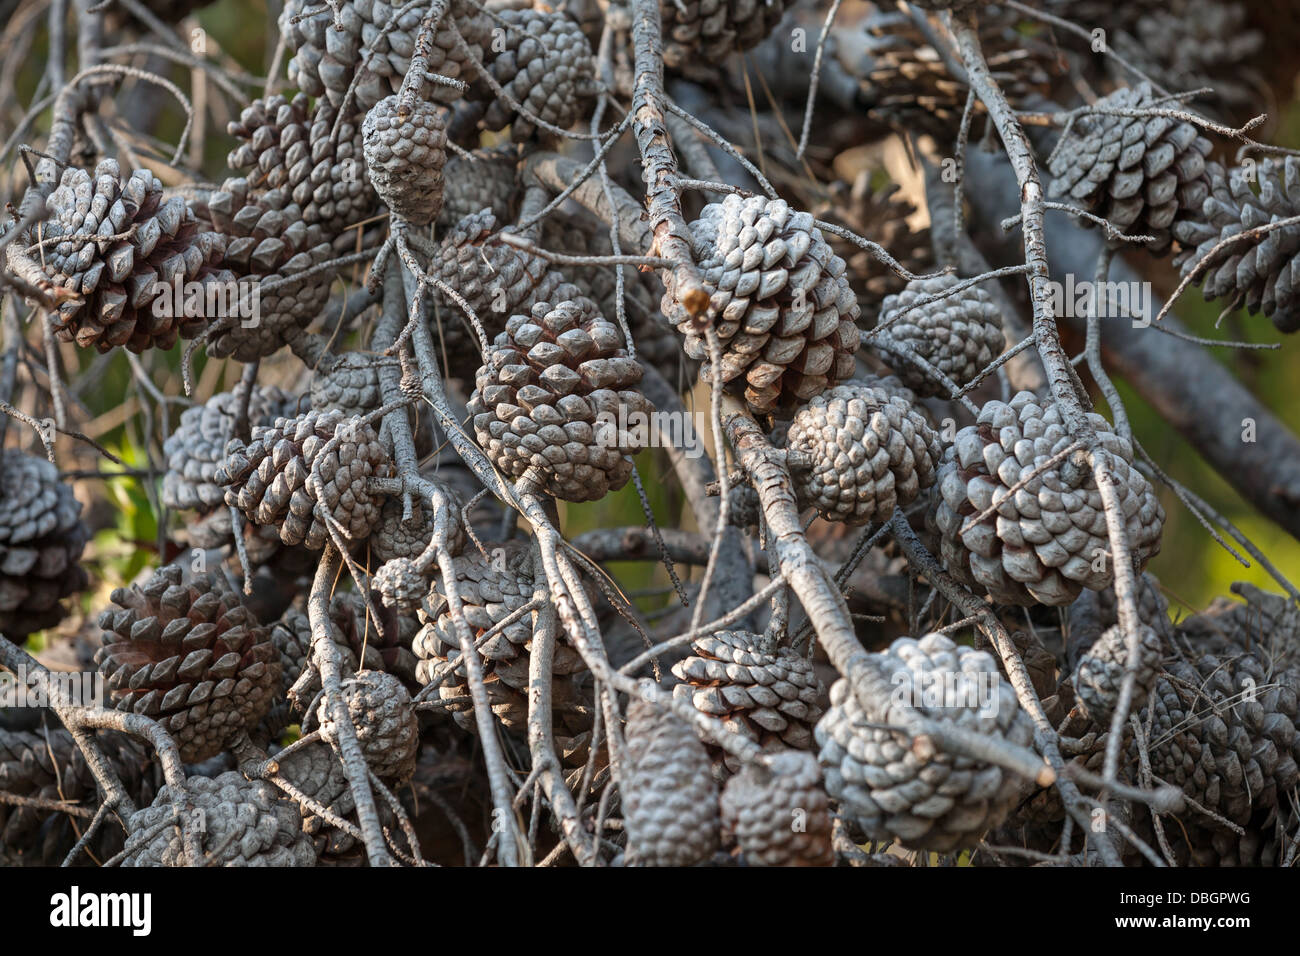 A lot of dry pine tree cones on branches Stock Photo